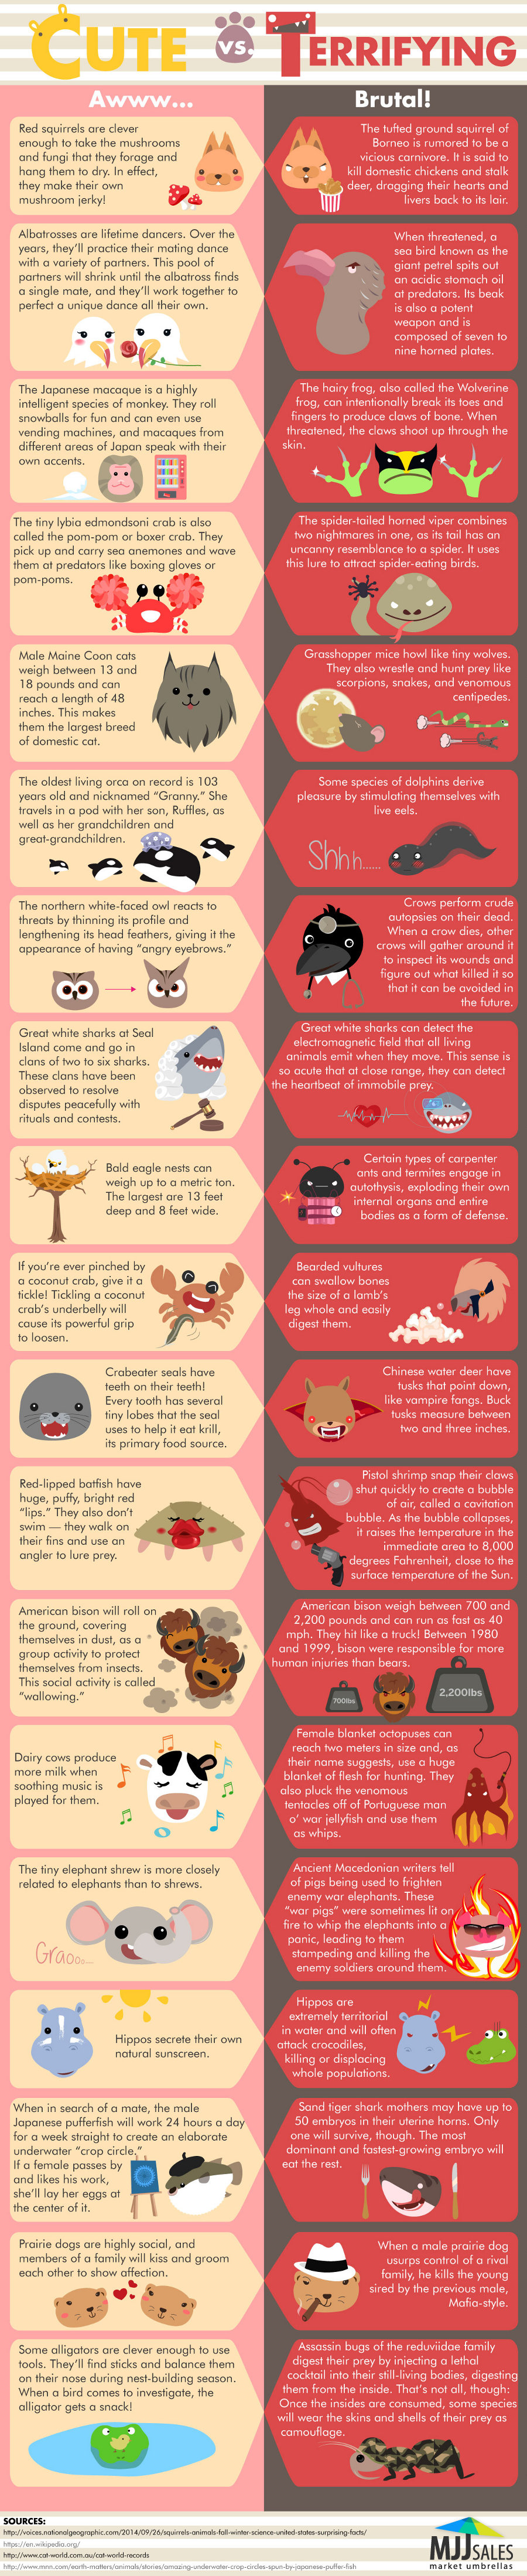 Cute vs Terrifying Facts About Animals